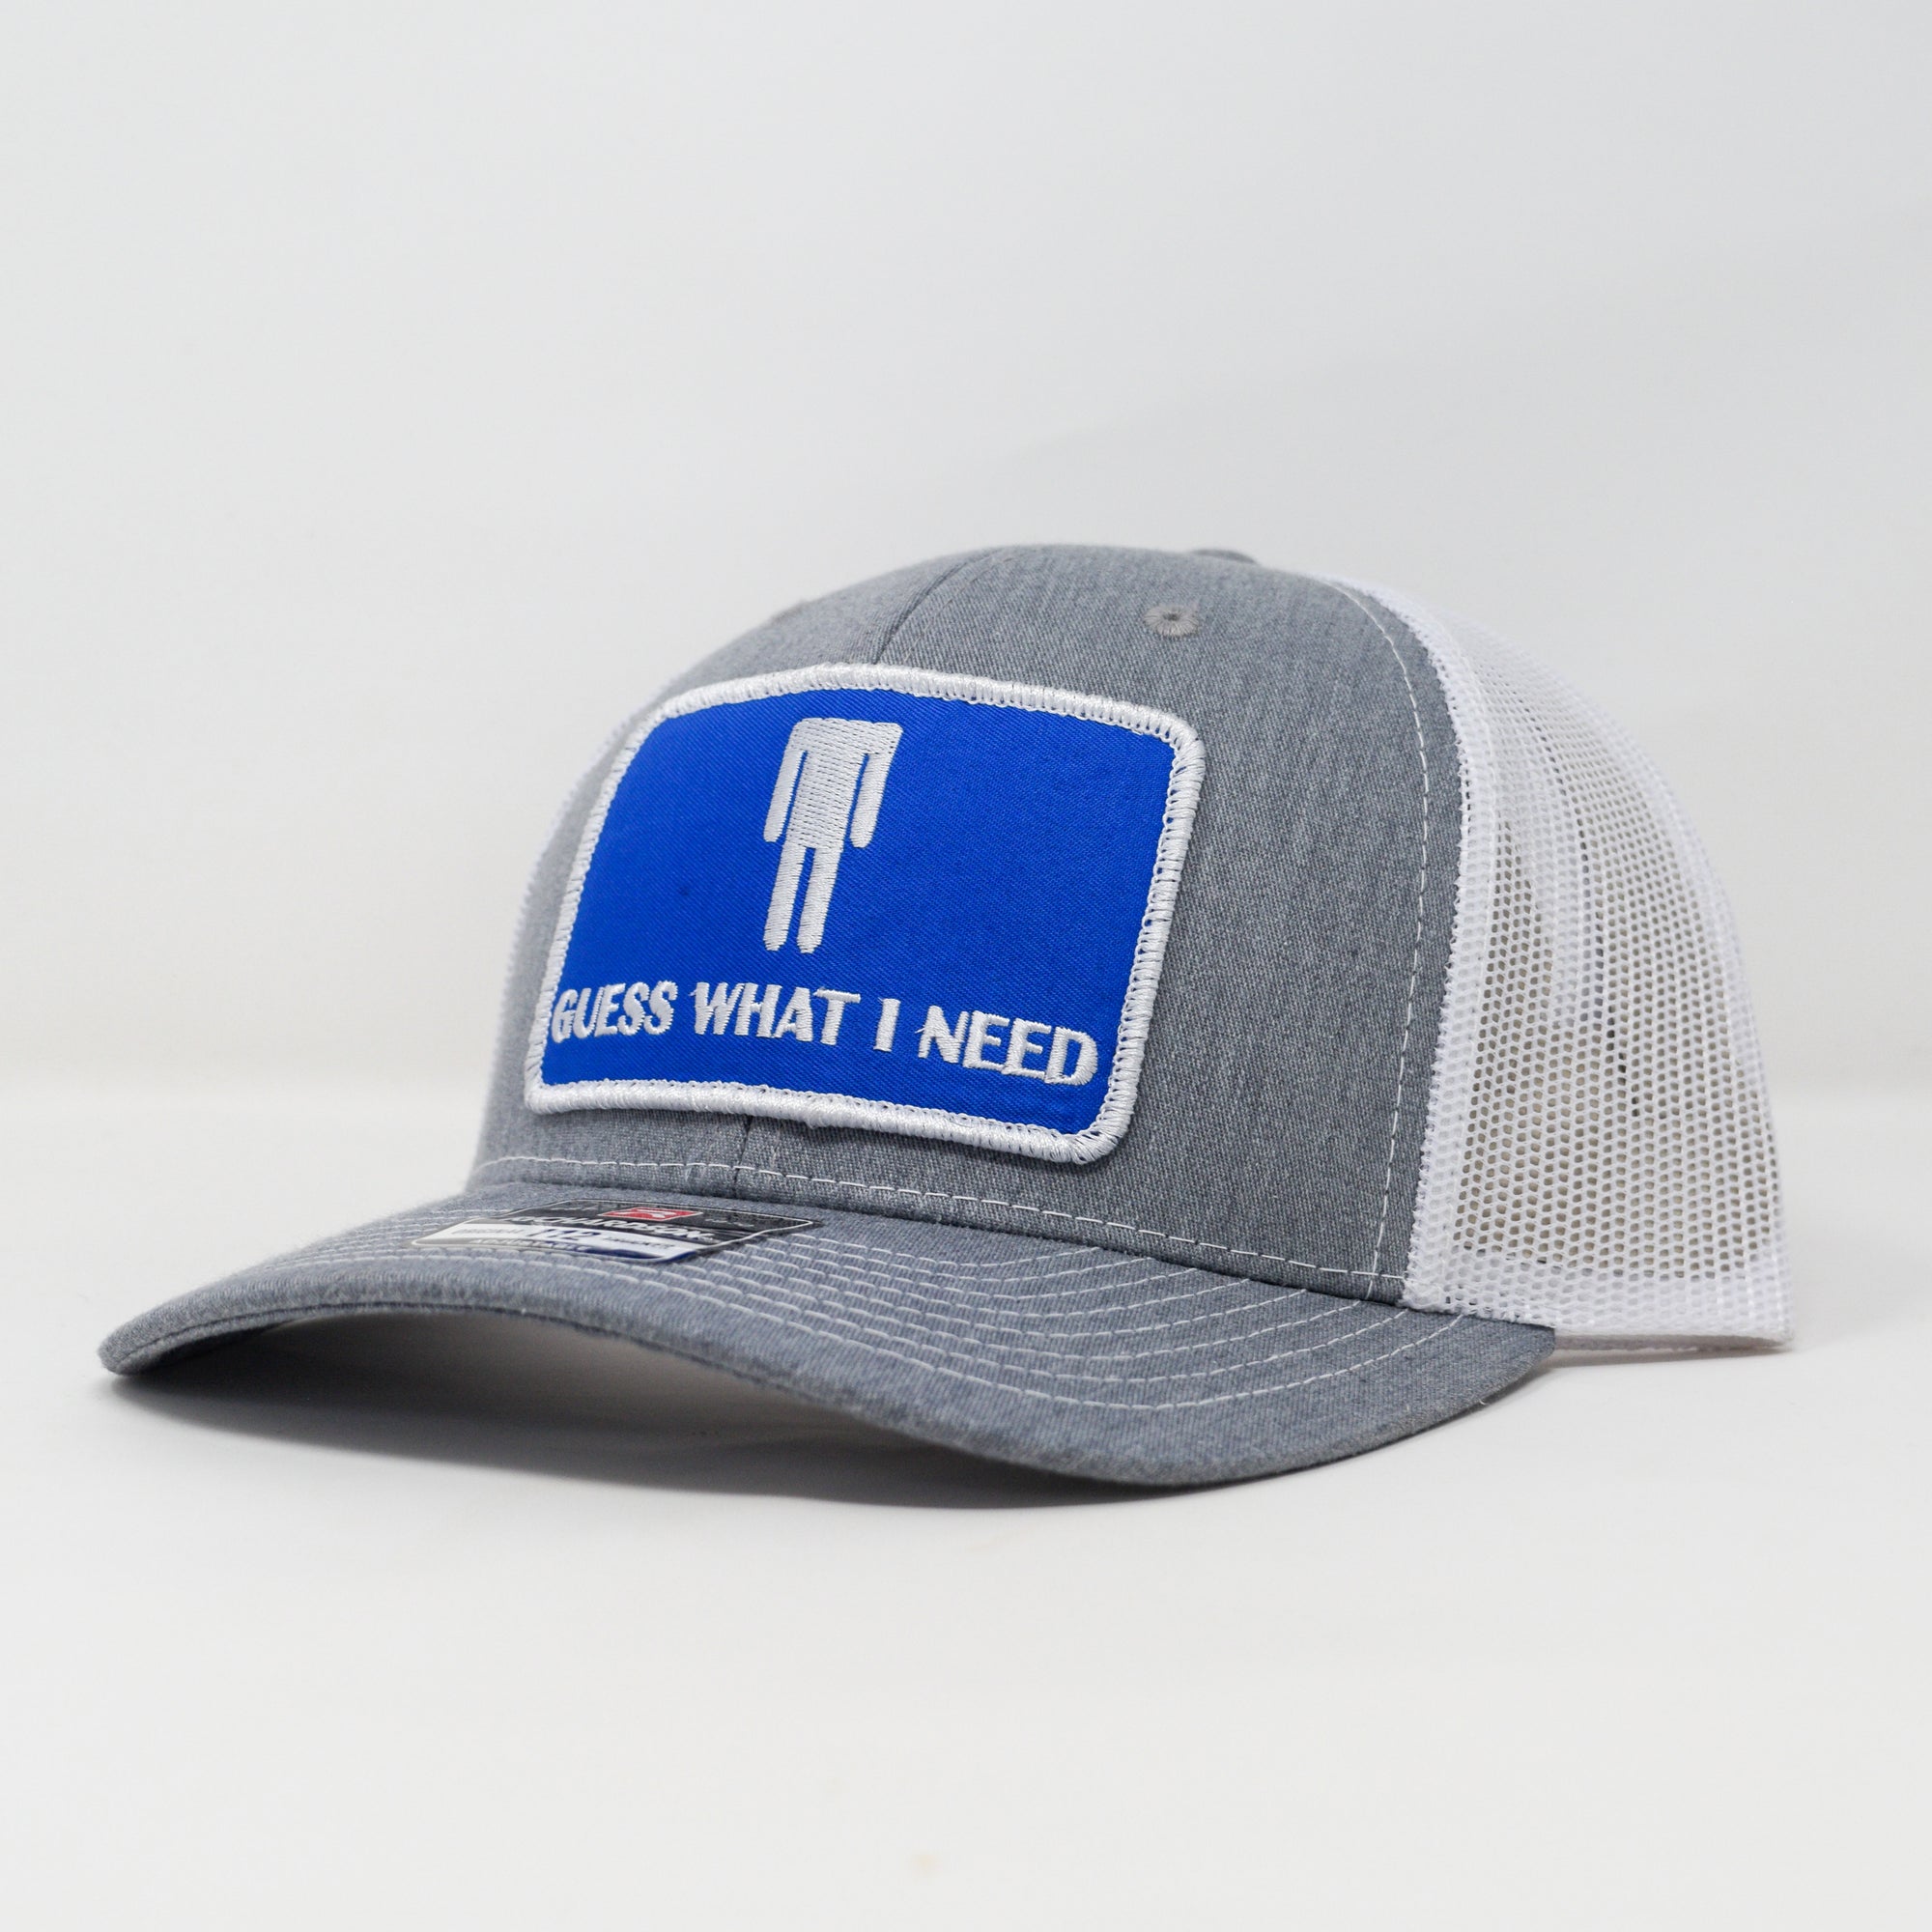 112 Heather Grey/ White - Guess What I Need